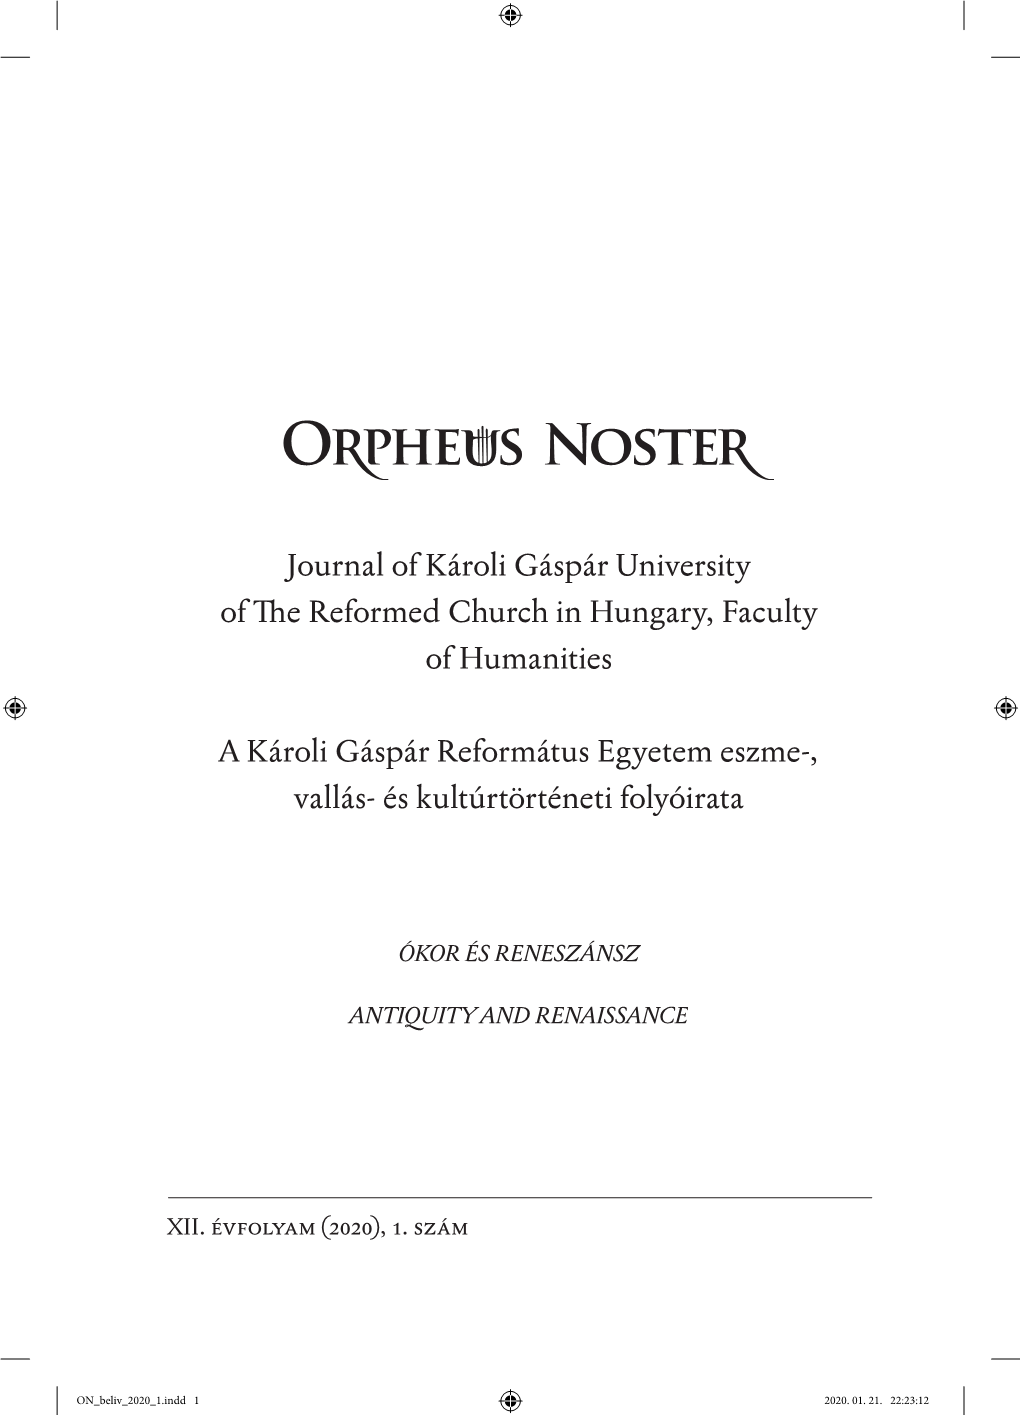 Journal of Károli Gáspár University of the Reformed Church in Hungary, Faculty of Humanities